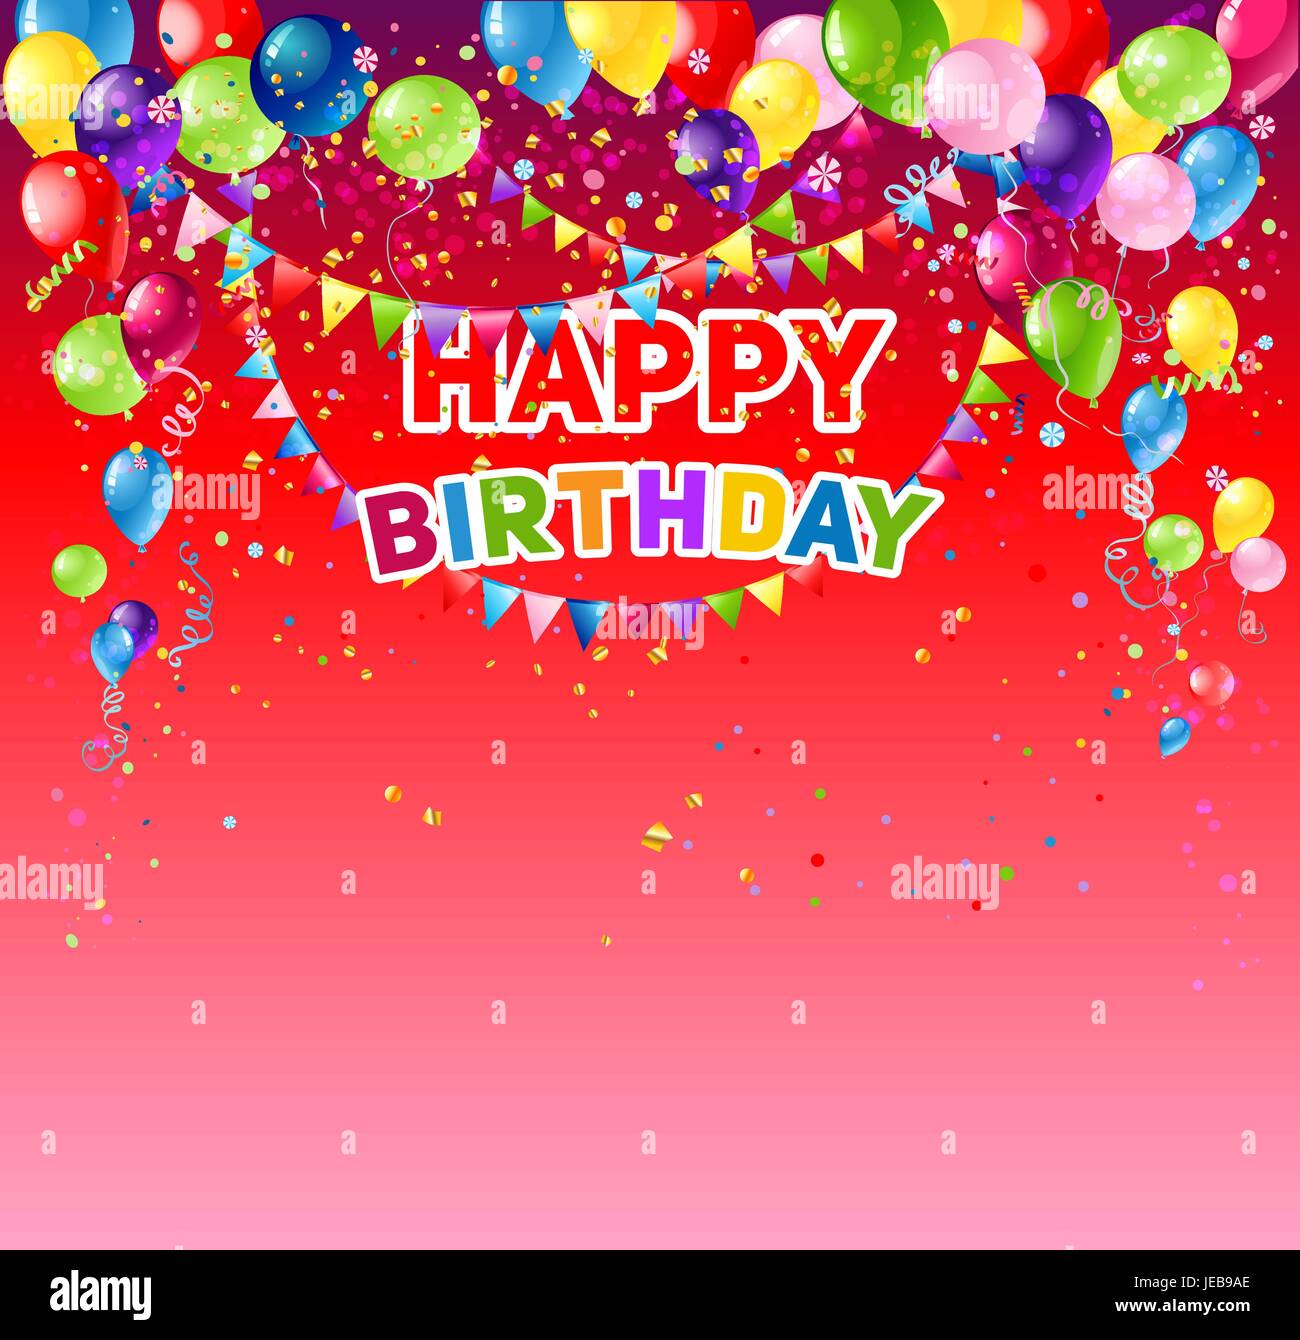 Happy birthday lettering template red background Vector Image